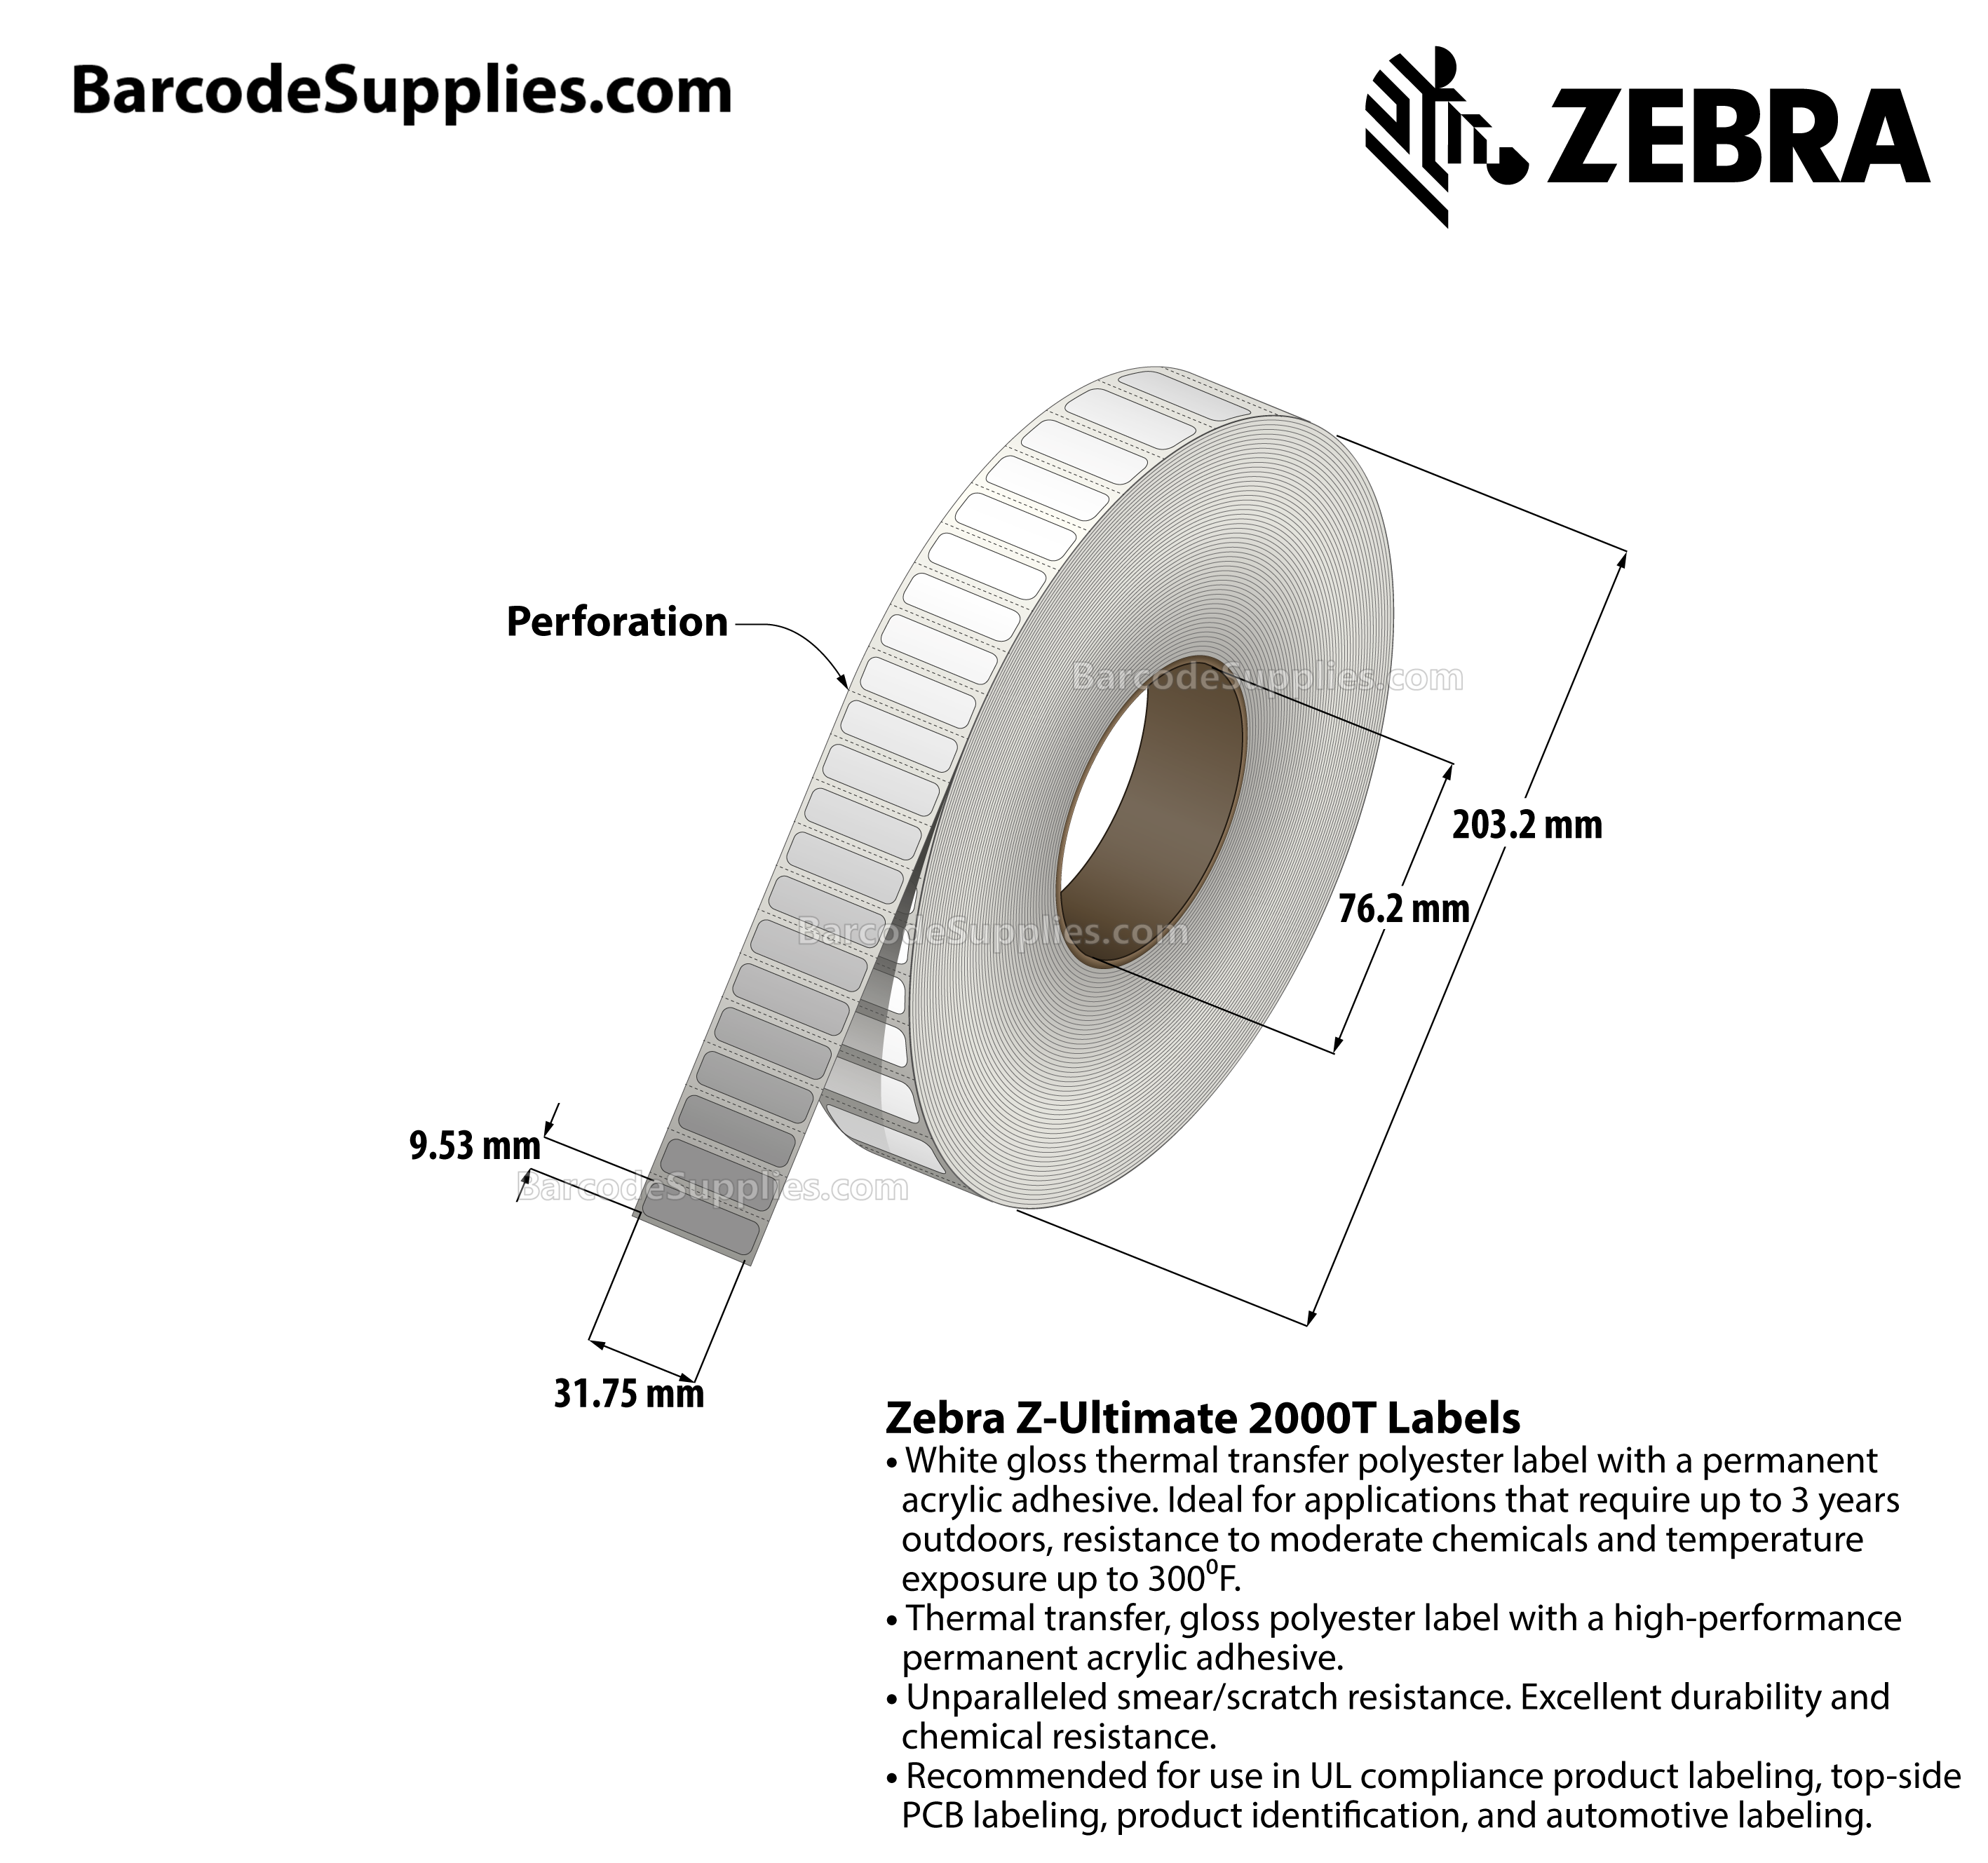 1.25 x 0.375 Thermal Transfer White Z-Ultimate 2000T Labels With Permanent Adhesive - Perforated - 12342 Labels Per Roll - Carton Of 4 Rolls - 49368 Labels Total - MPN: 10011978